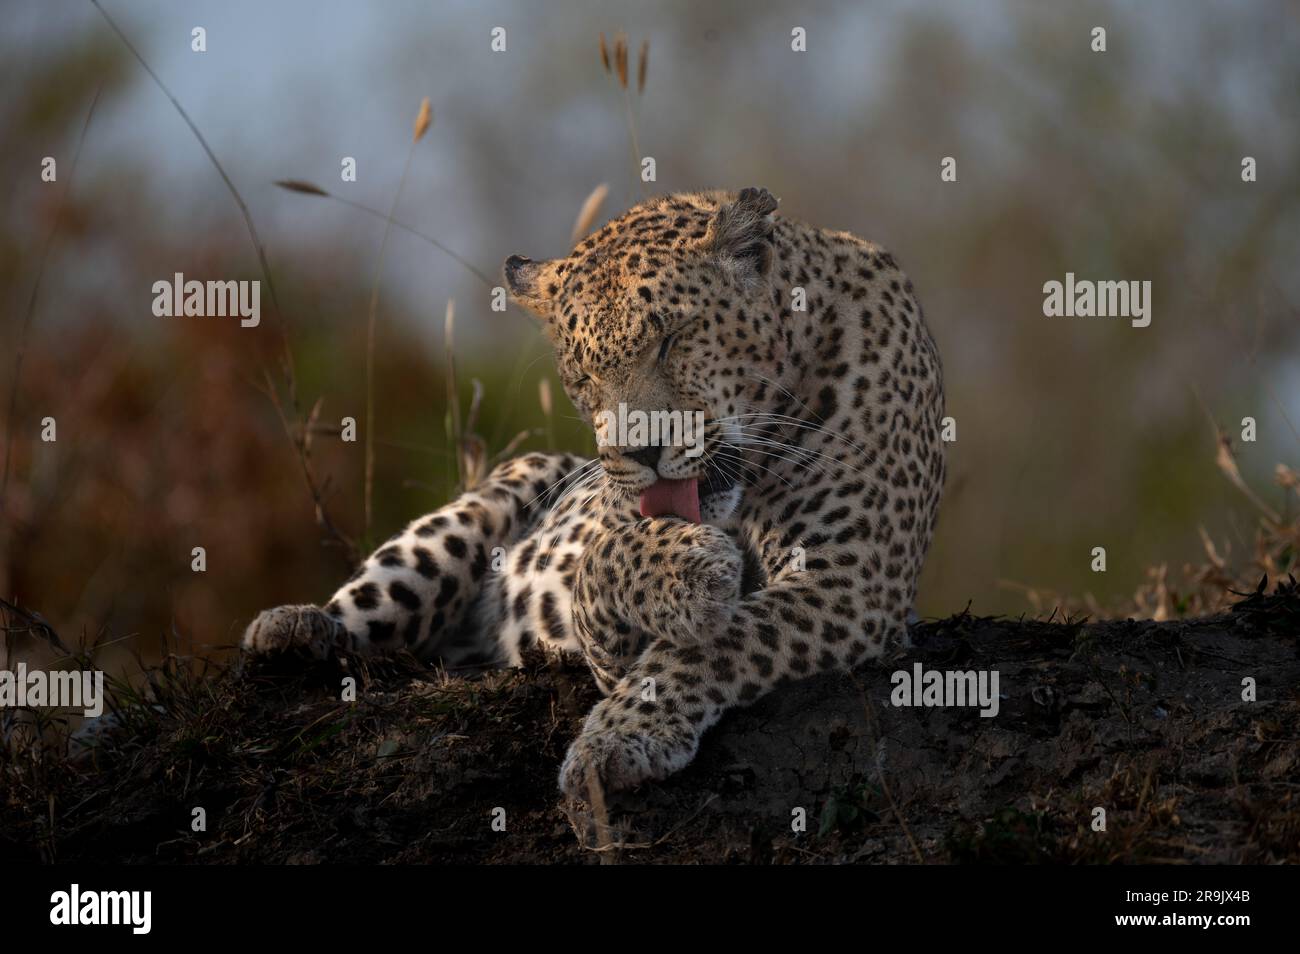 A leopard, Panthera pardus, grooming itself. Stock Photo